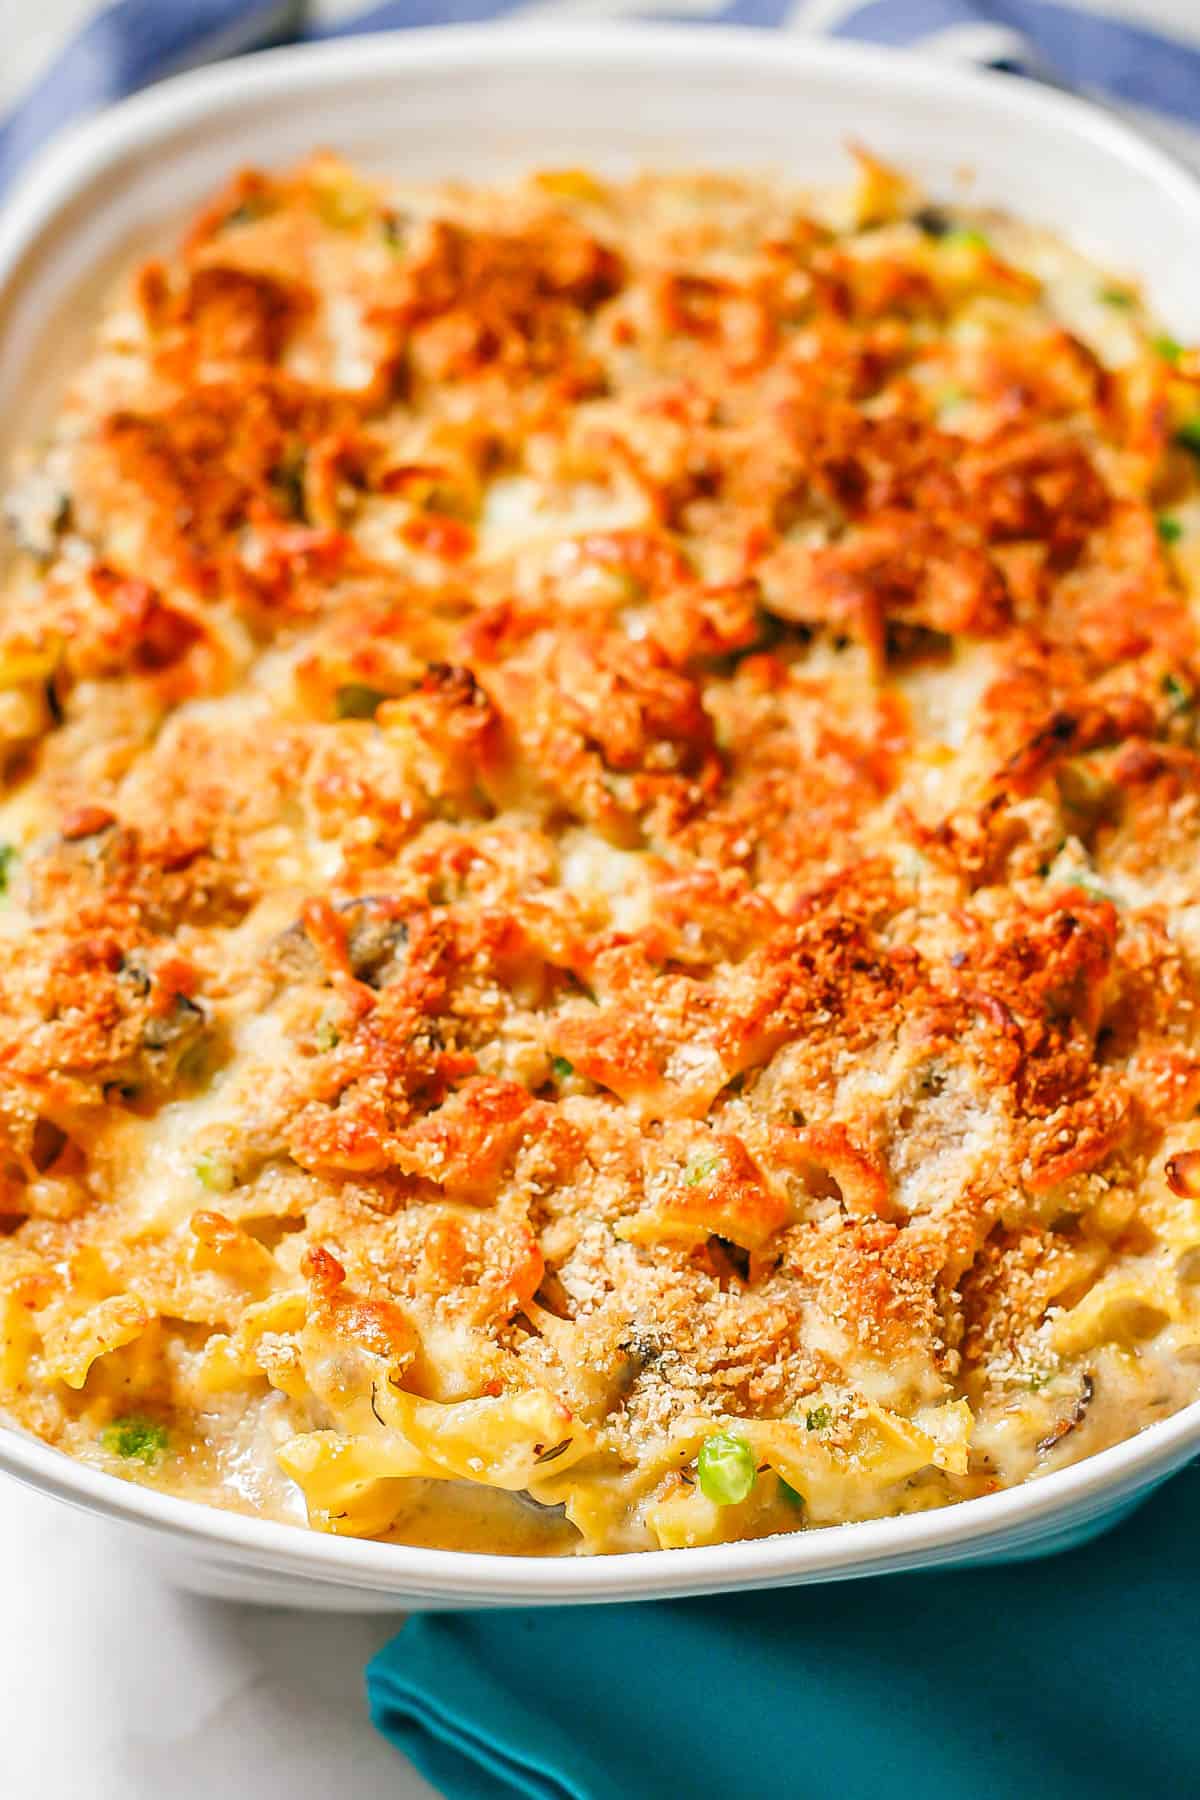 Baked tuna noodle casserole in a white rectangular casserole dish before being served.